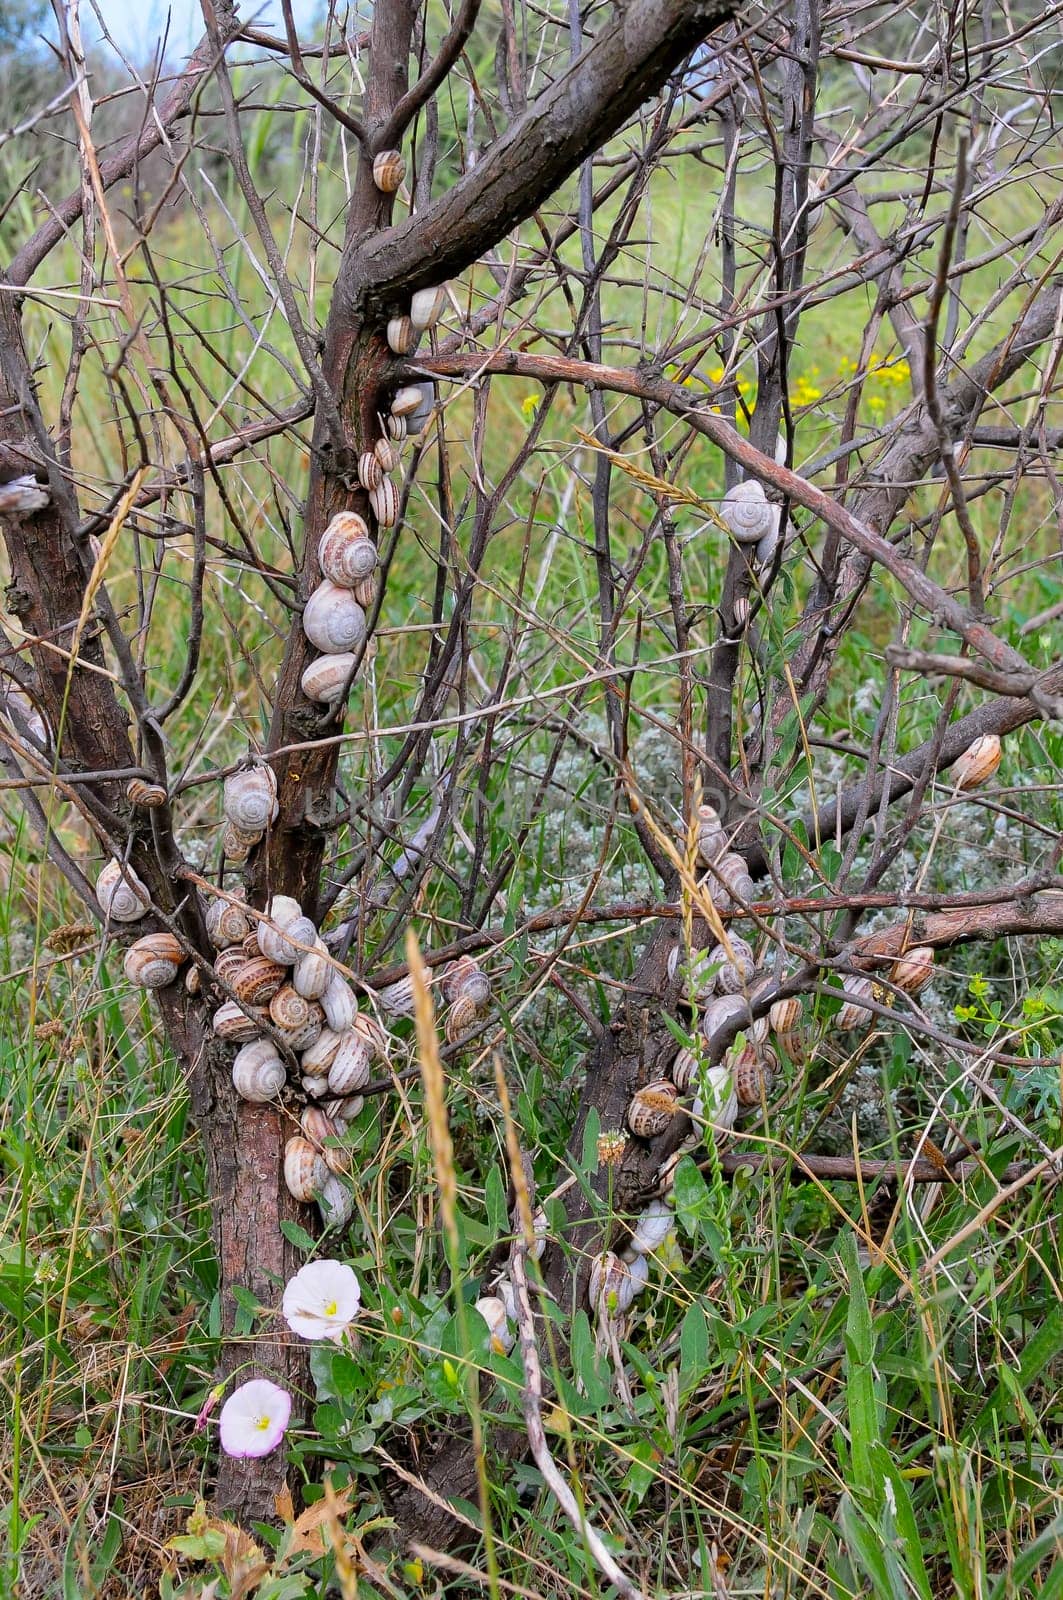 Eobania vermiculata (Helicidae),  accumulation of sleeping mollusks on the branches of plants in summer in the eastern Crimea